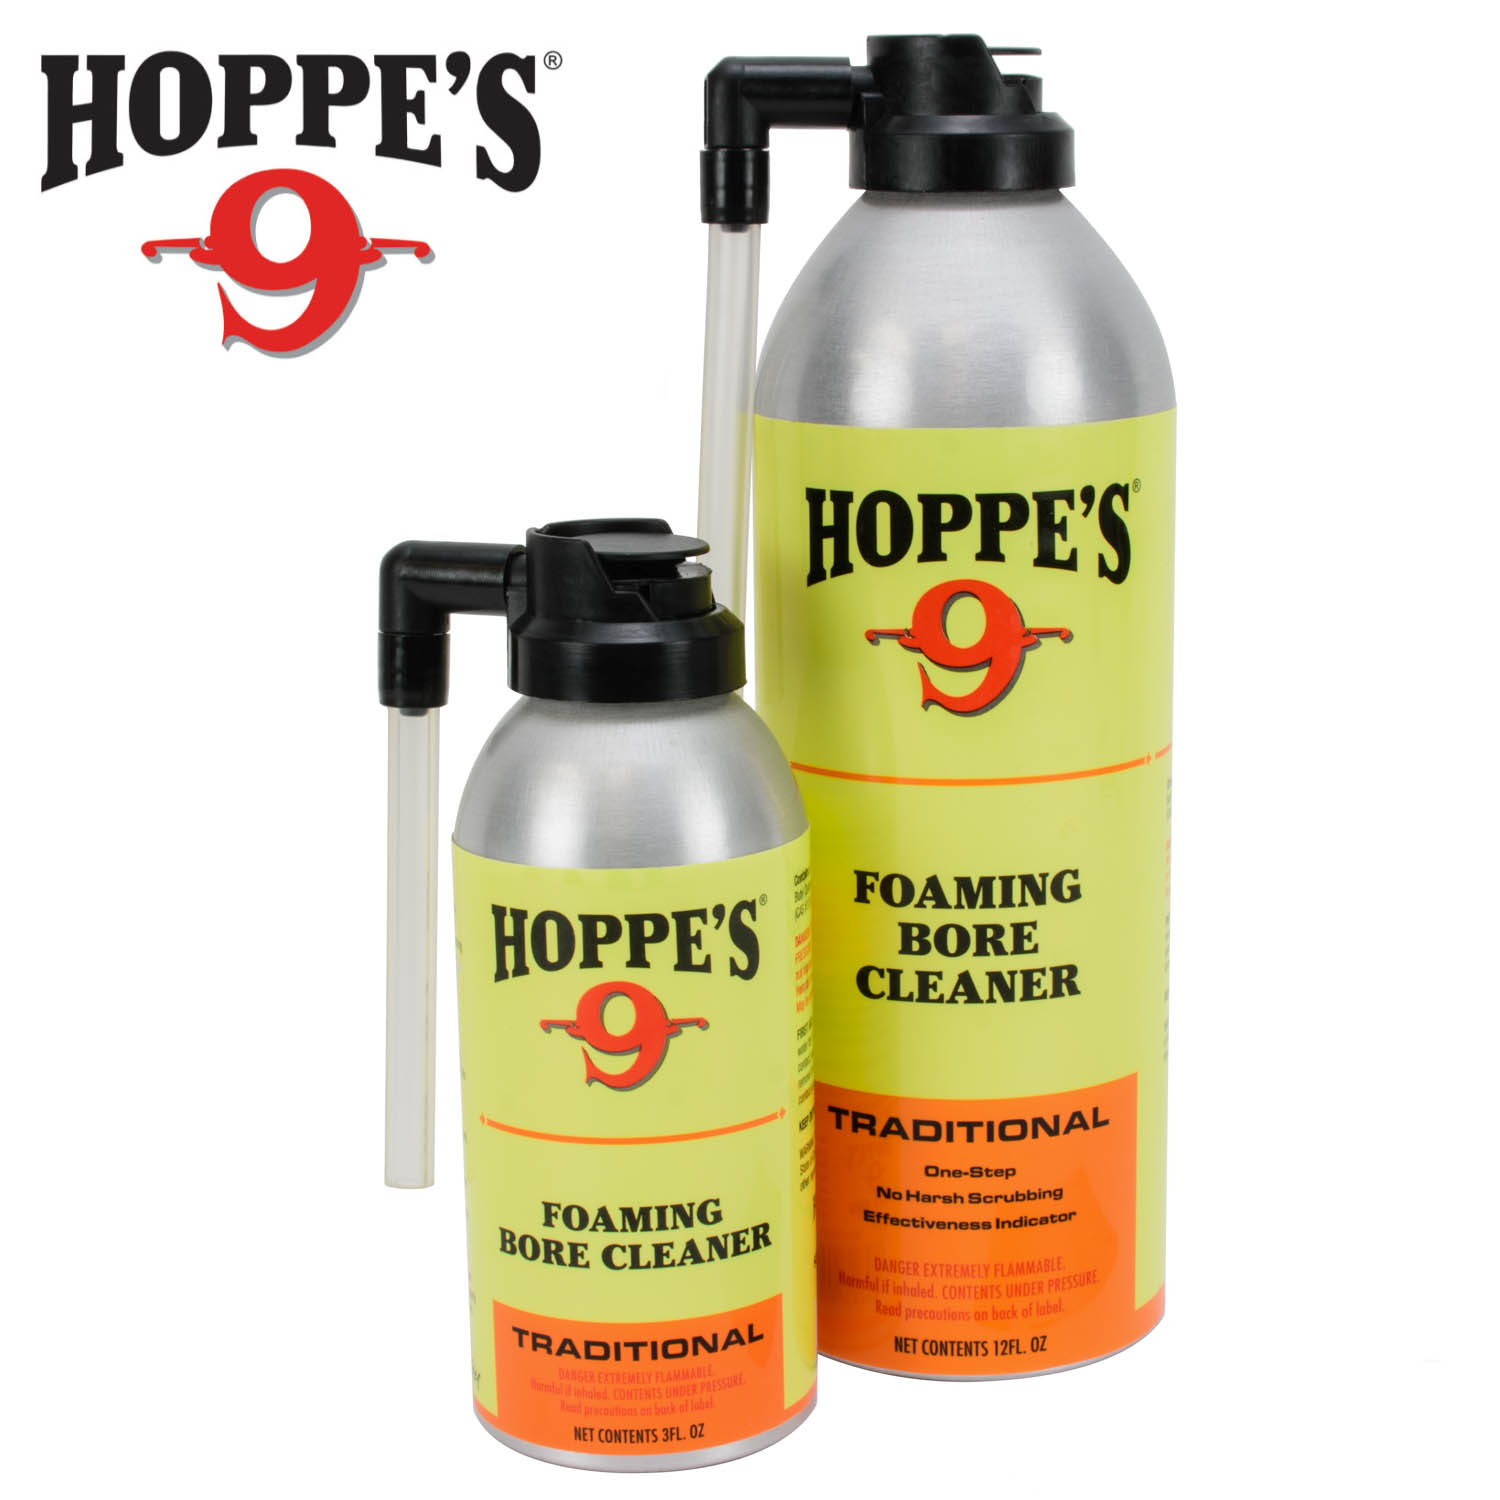 Hoppe's No.9 Foaming Bore Cleaner: MGW